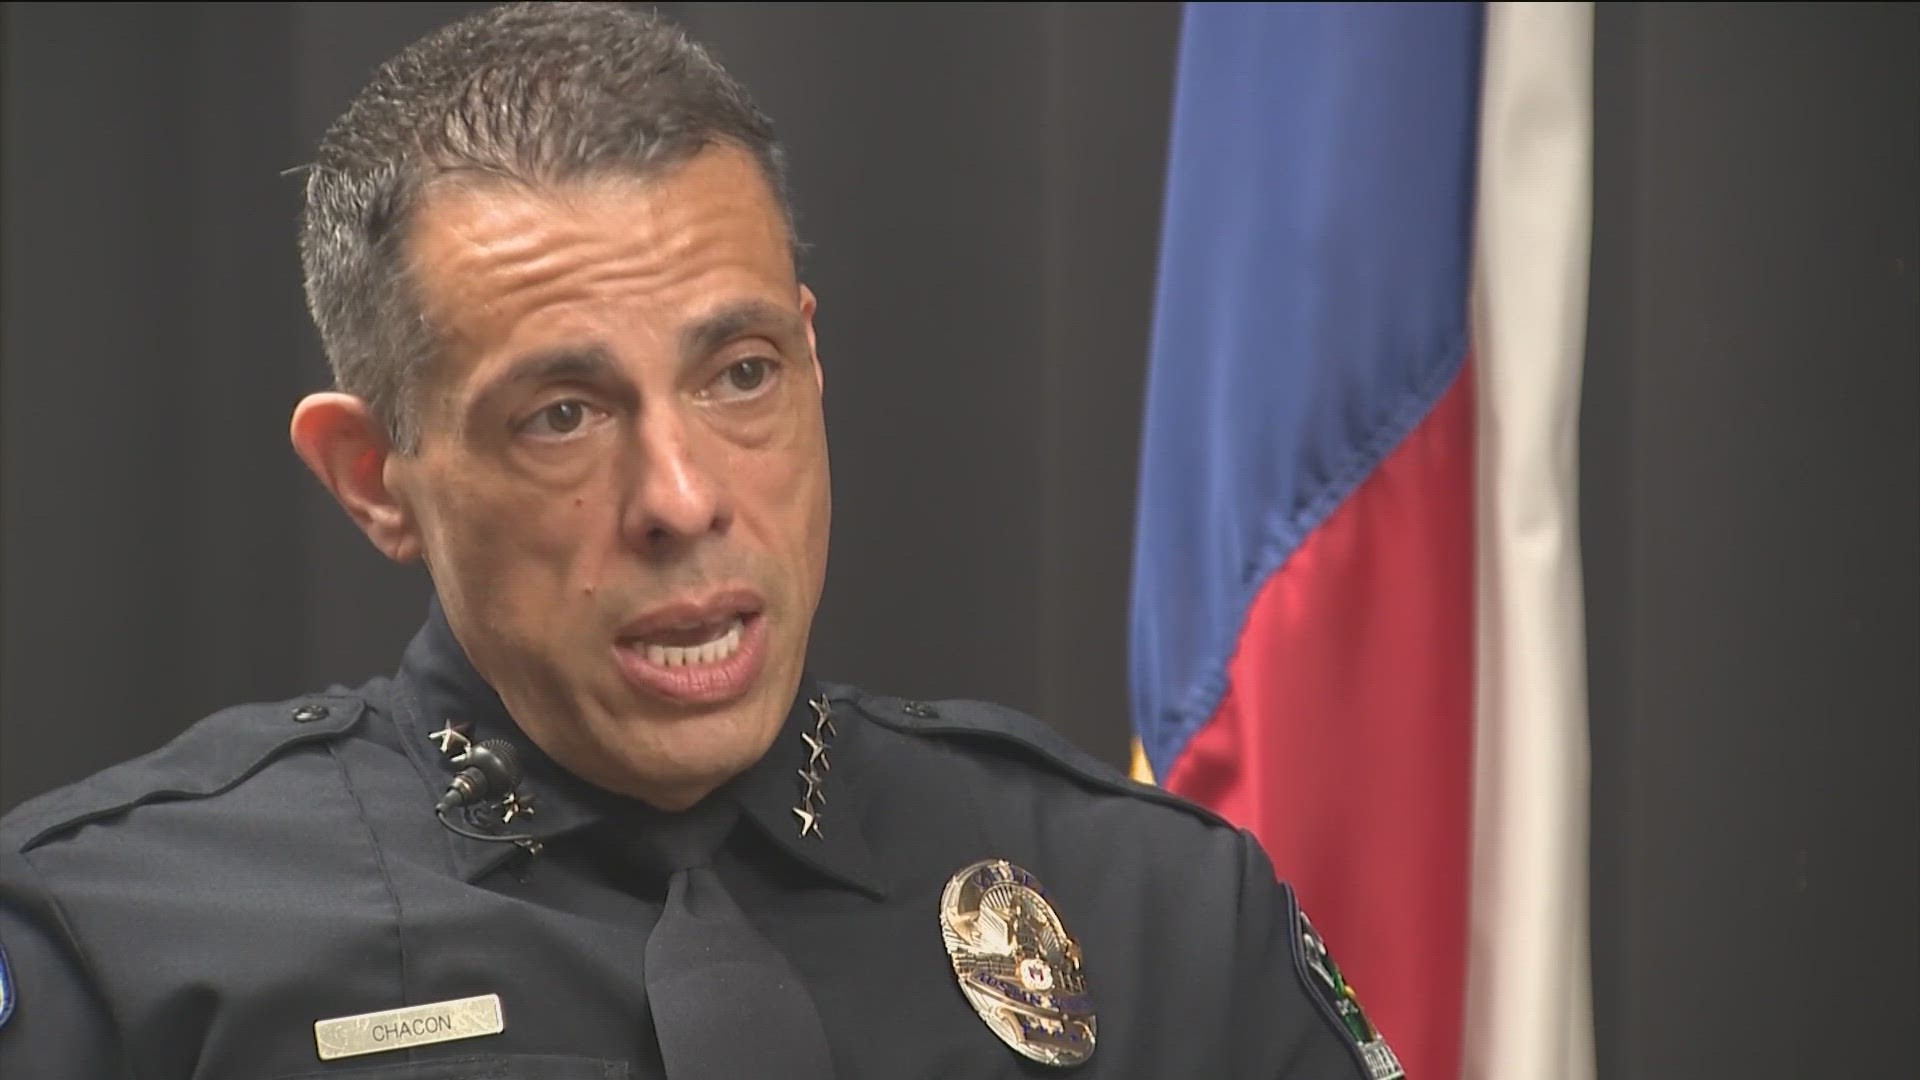 Austin Police Chief Joseph Chacon will step down from his position and retire from the department, the KVUE Defenders have learned.